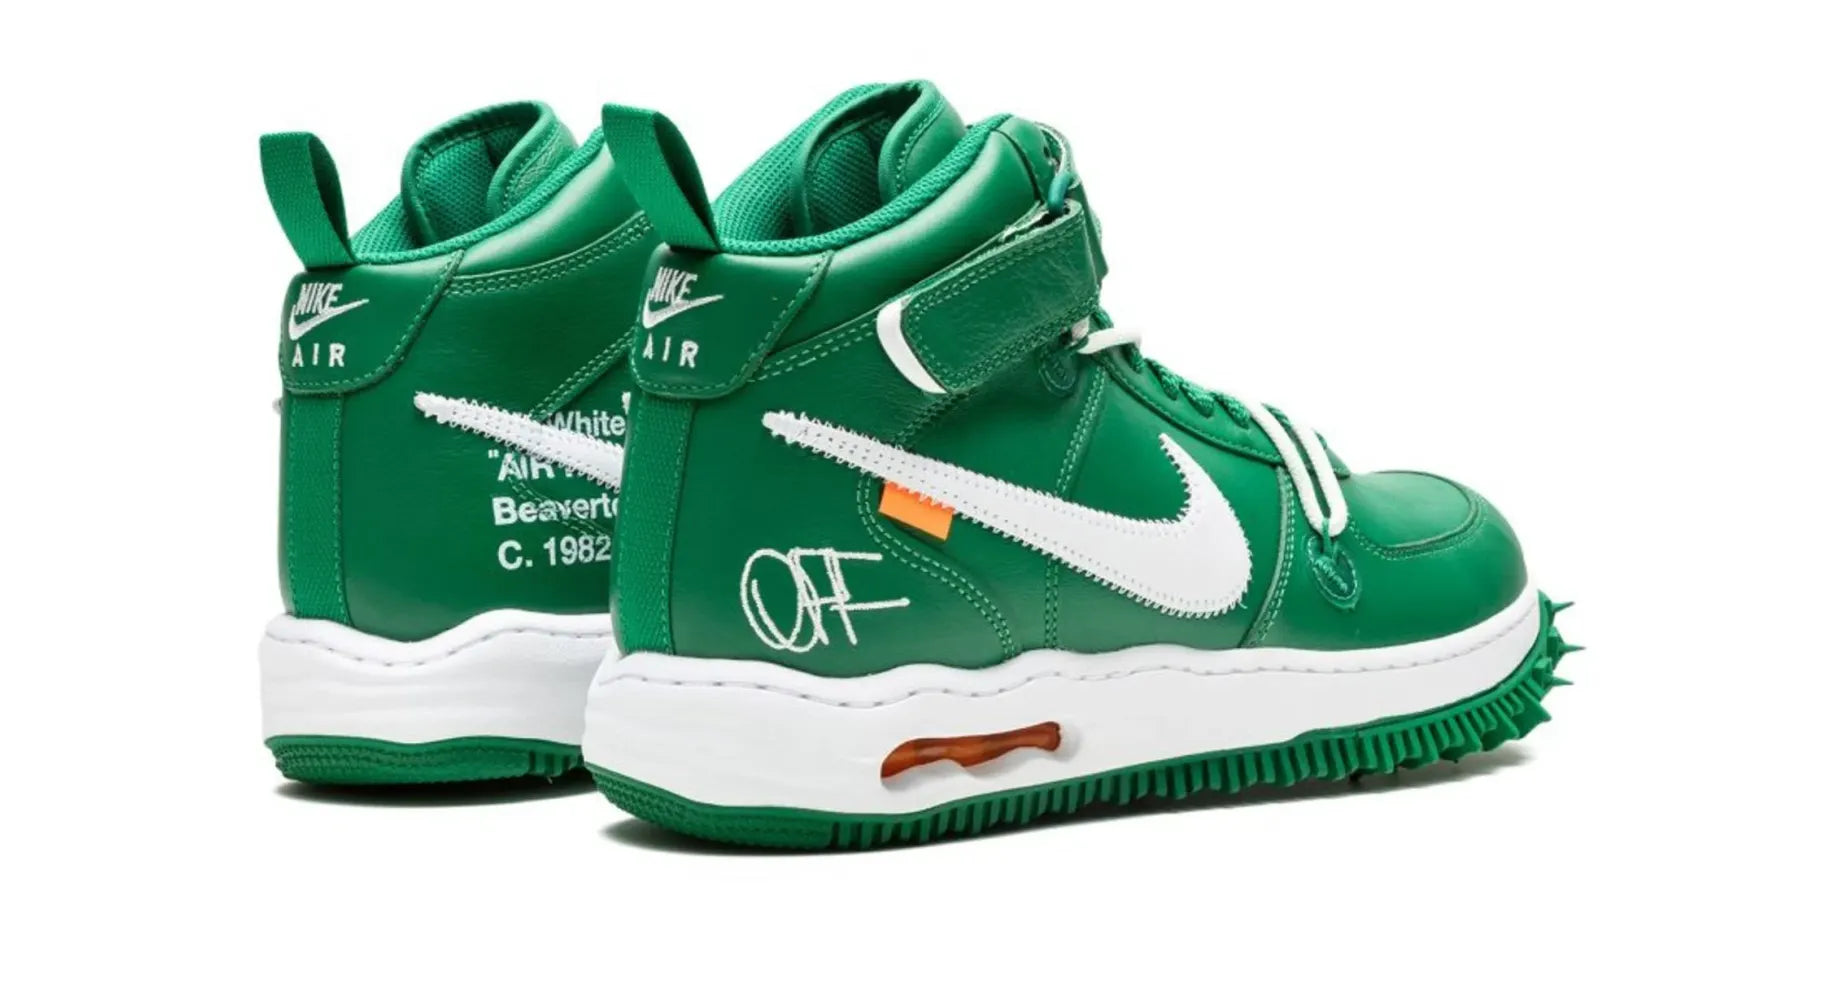 Off White x Nike Air Force 1 Mid Pine Green Dropping April 28